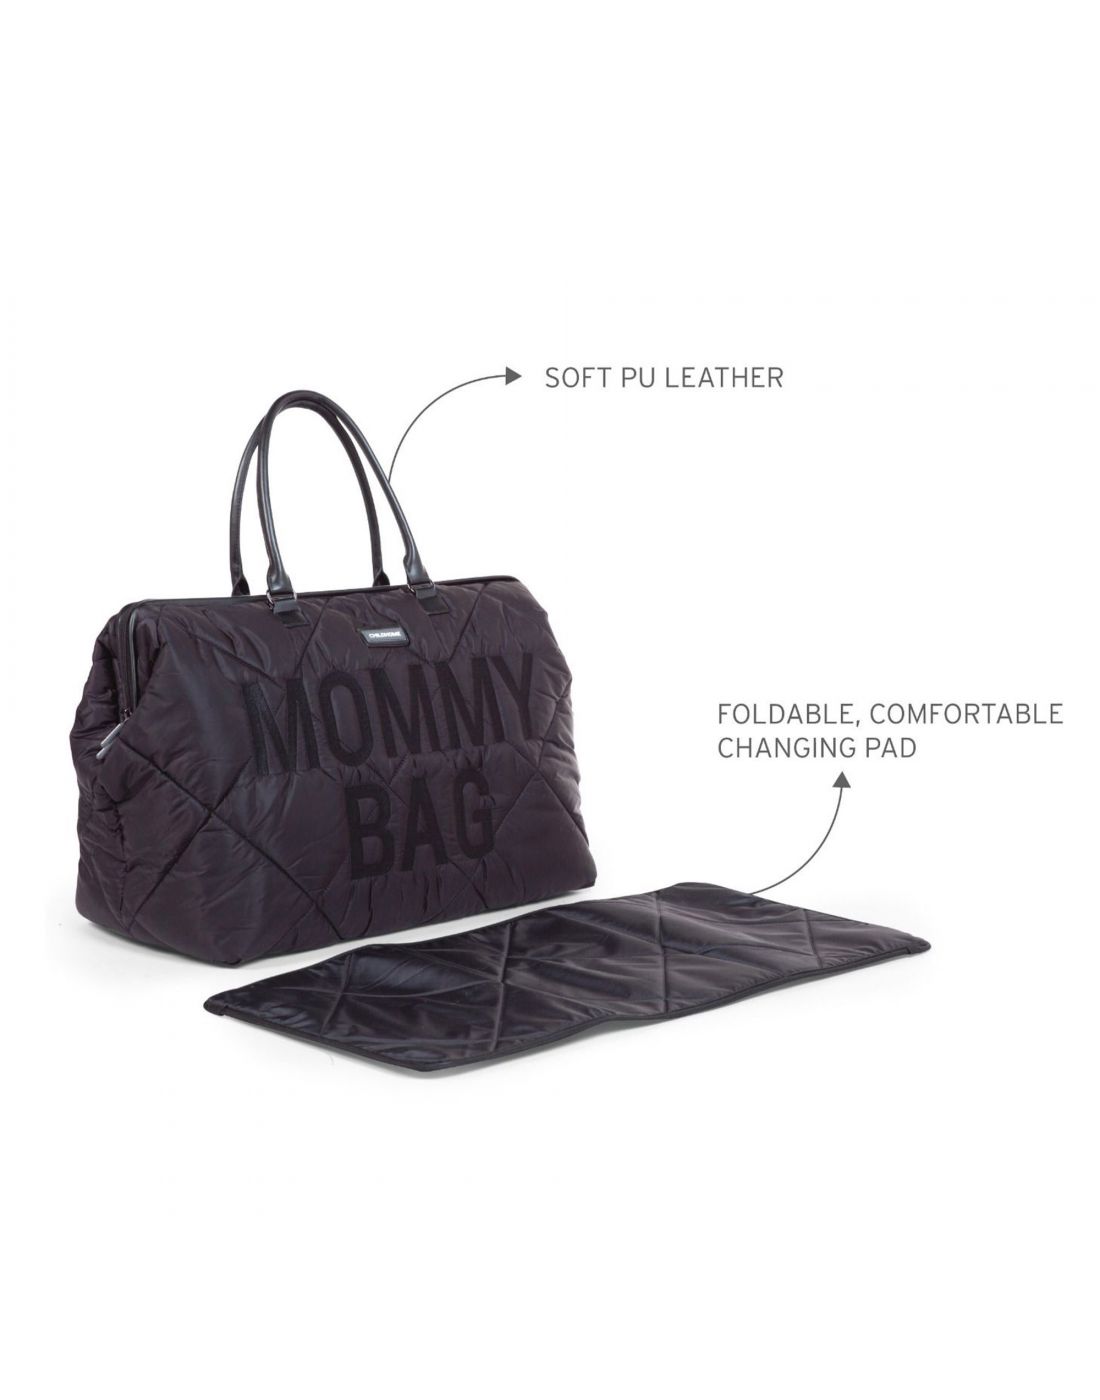 Childhome Mommy Bag Puffered Black